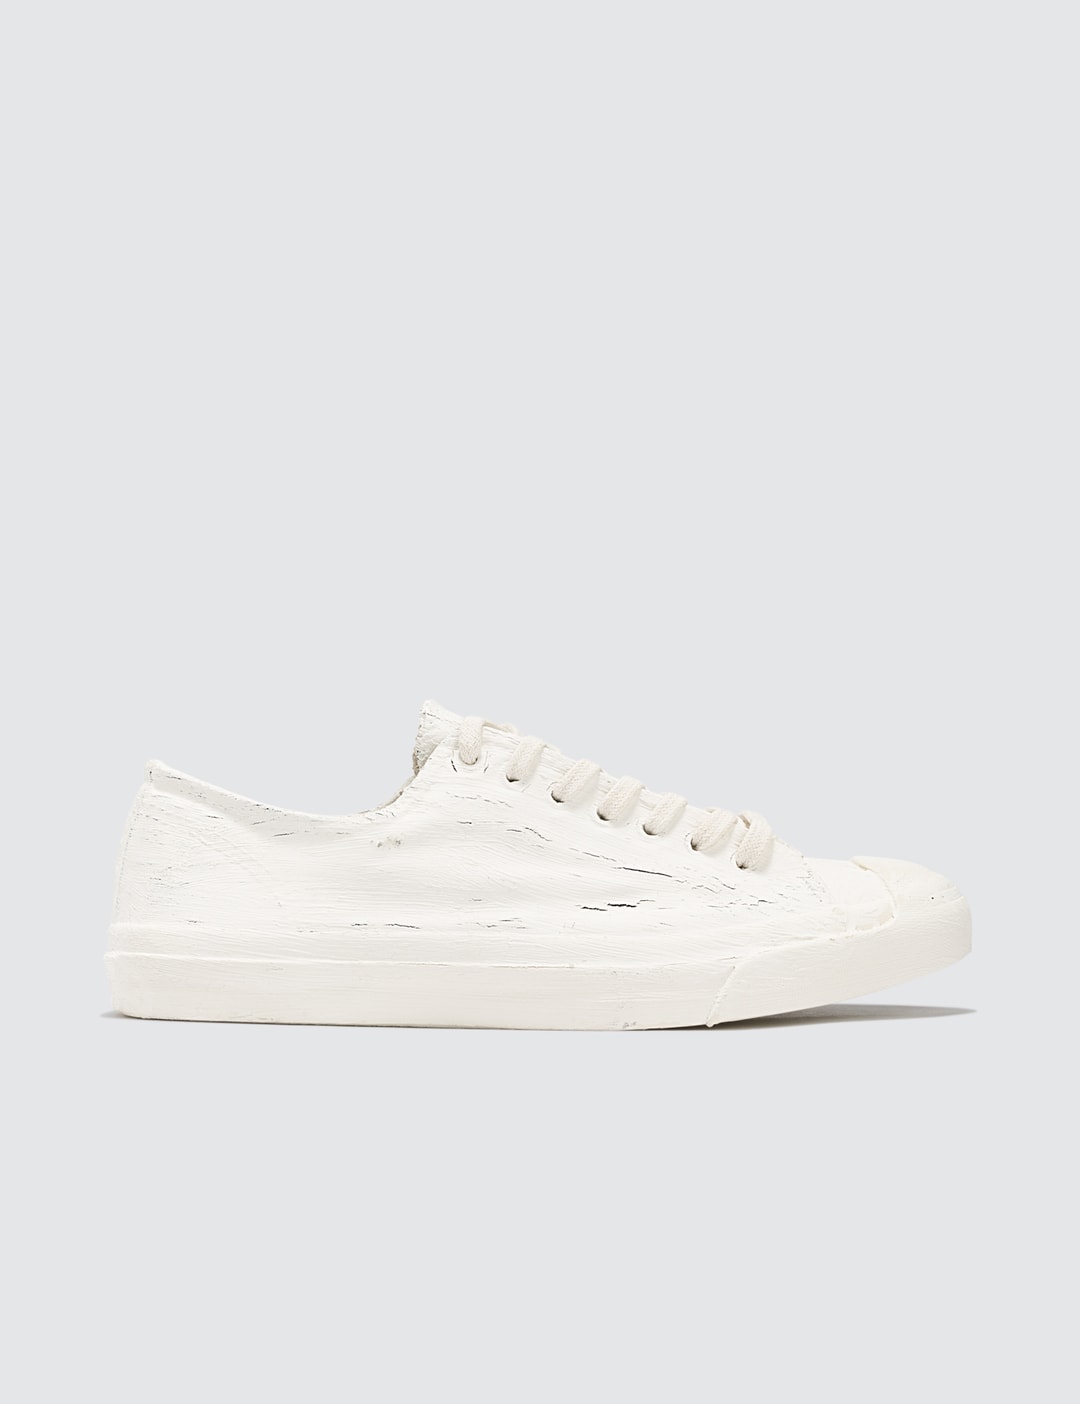 Converse - Converse 1st String Maison Margiela Jack | HBX - Globally Curated and Lifestyle by Hypebeast